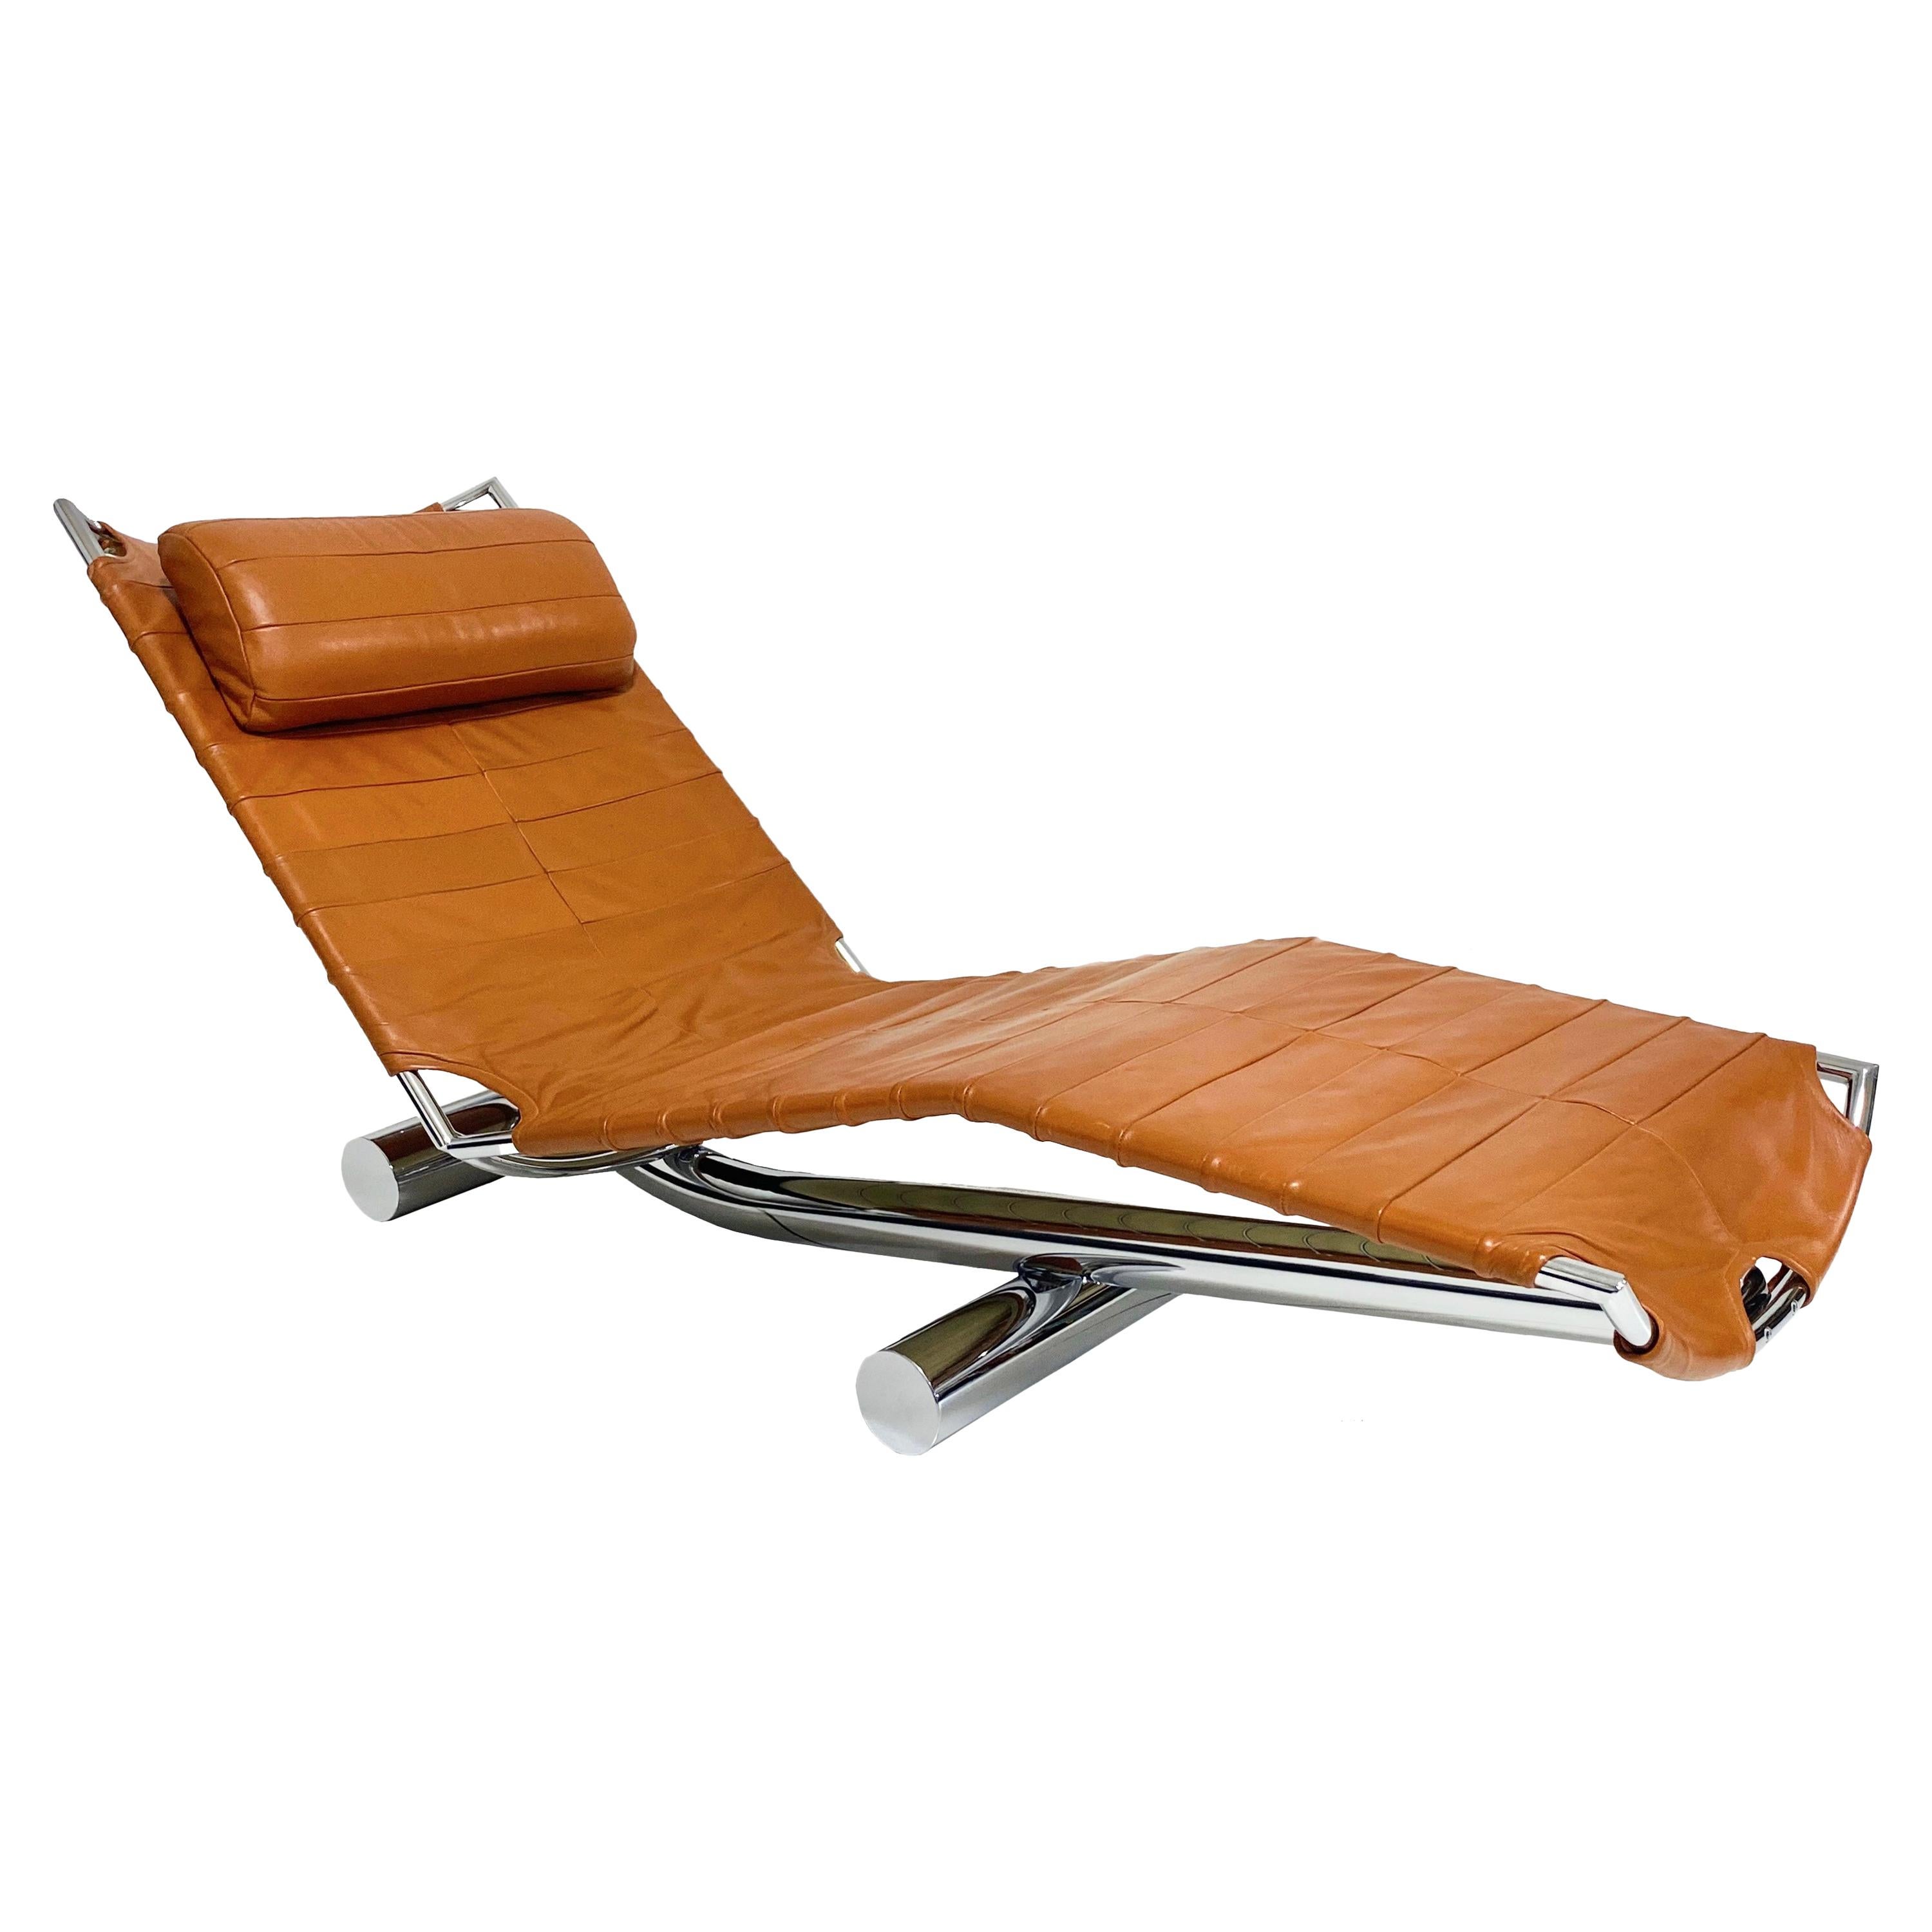 Paul Tuttle Chariot Chaise for Strassle Intl., 1972 For Sale